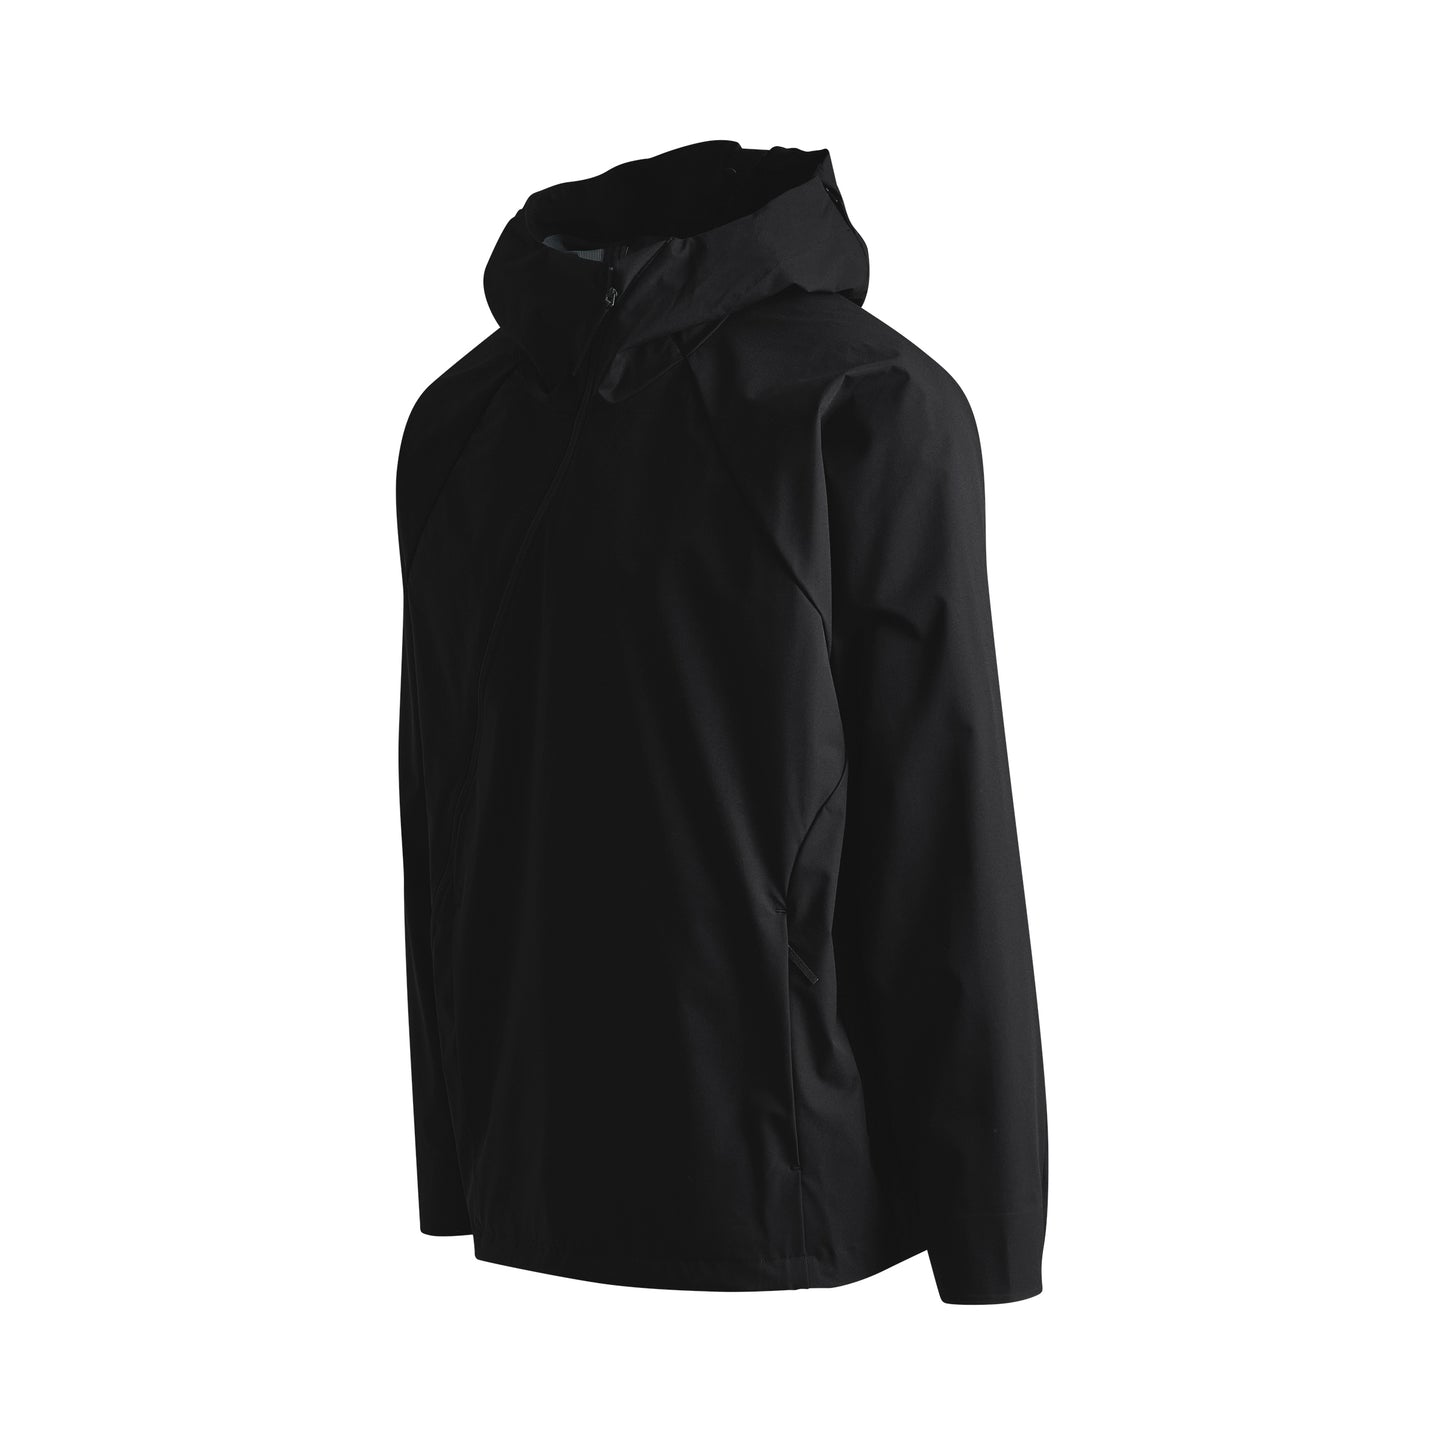 6.0 Technical Jacket (Center) in Black